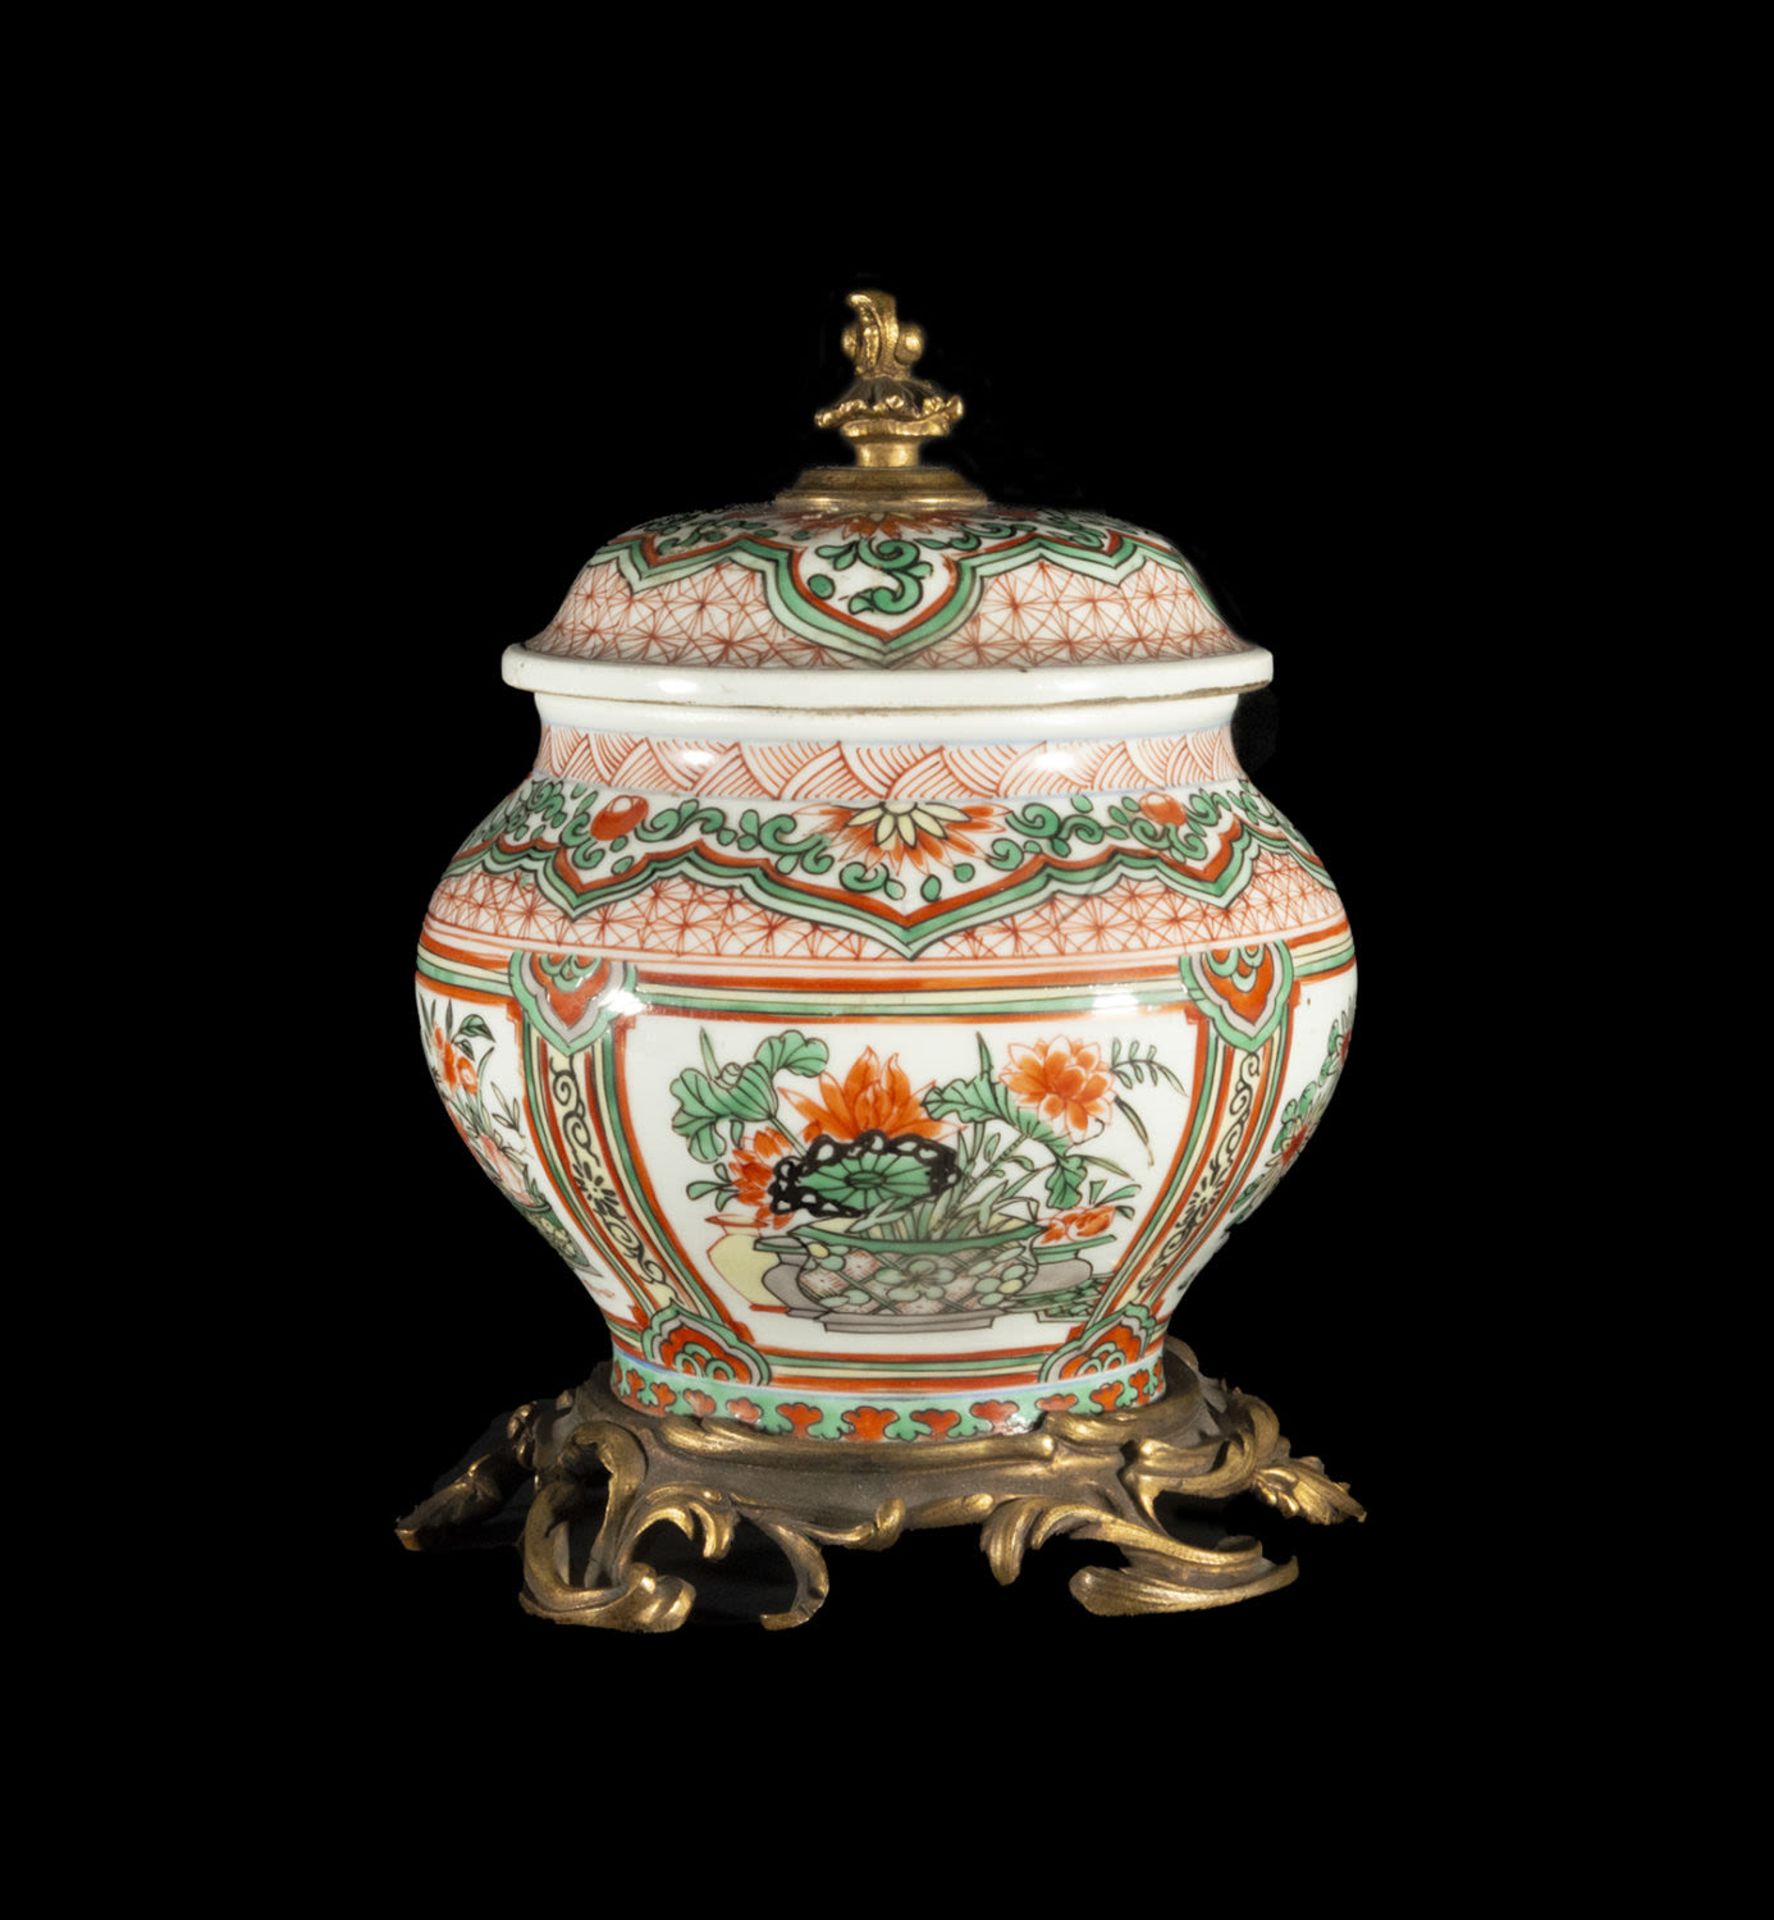 Potiche mounted in mercury-gilded bronze in Samson porcelain in the Chinese Kangxi famille verte sty